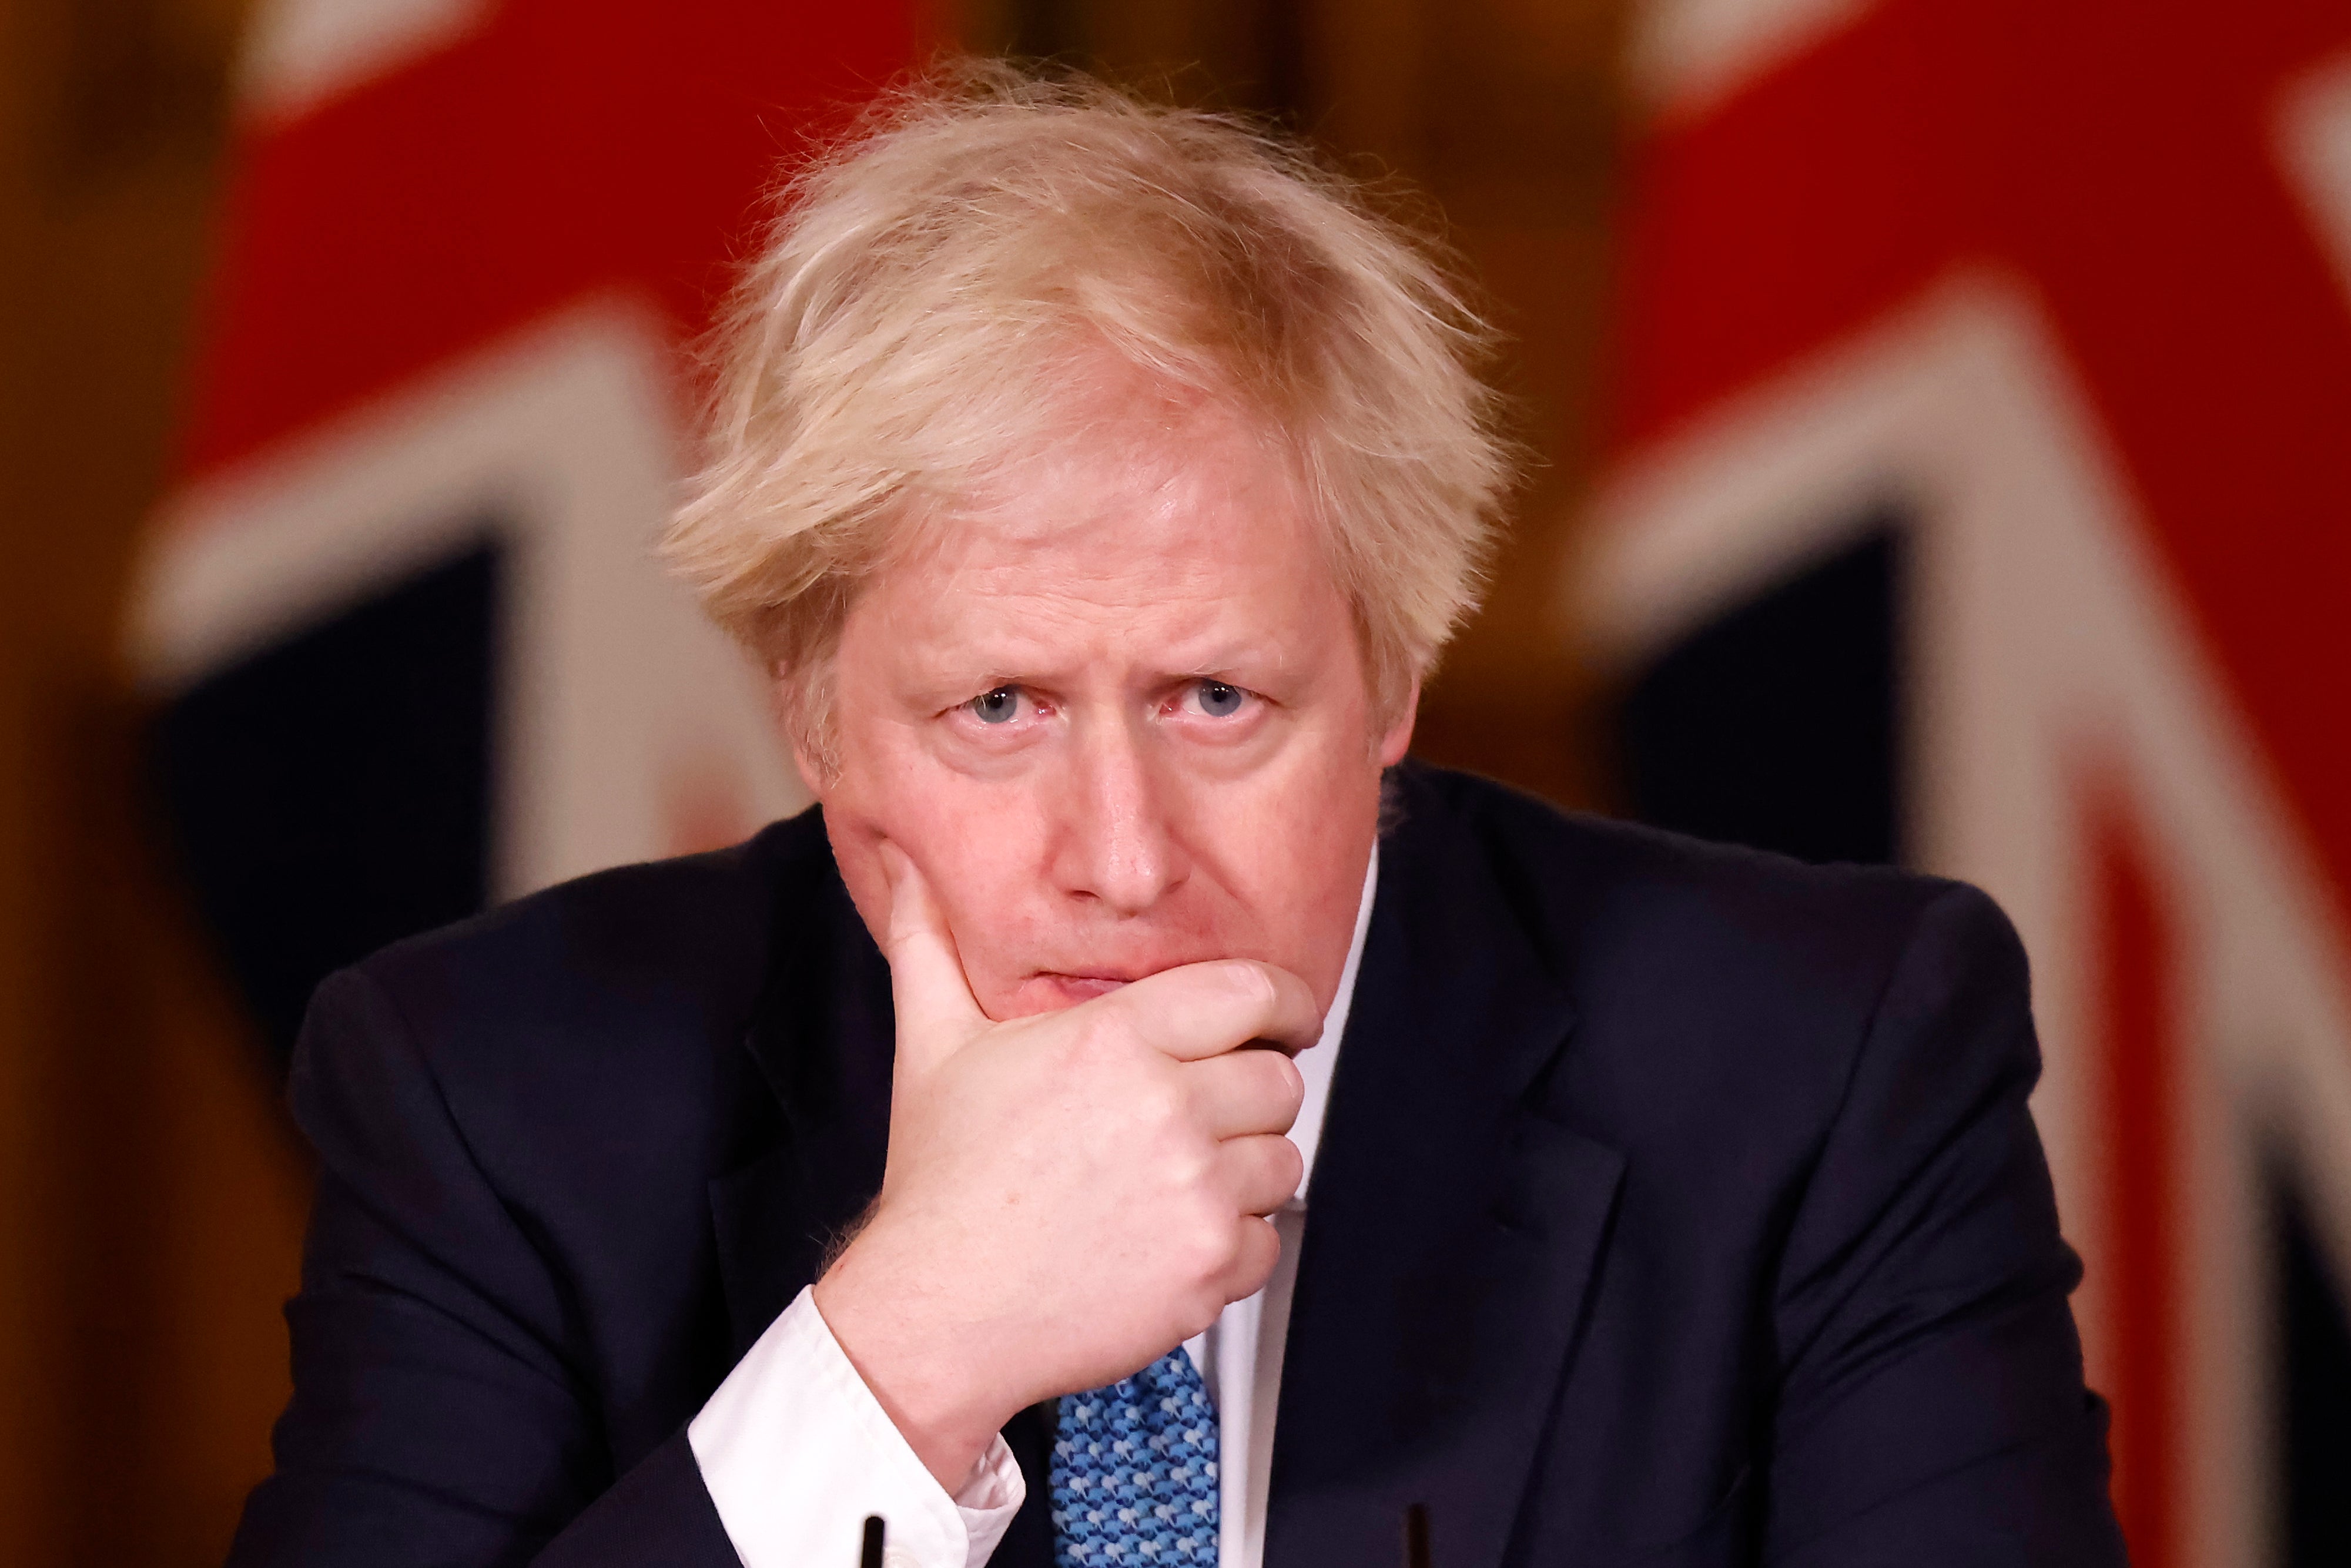 British Prime Minister, Boris Johnson speaks during a virtual press conference at No 10 Downing Street on 7 January, 2021 in London, England. The PM’s father, Stanley Johnson, has compared his Covid response to Winston Churchill in World War II.